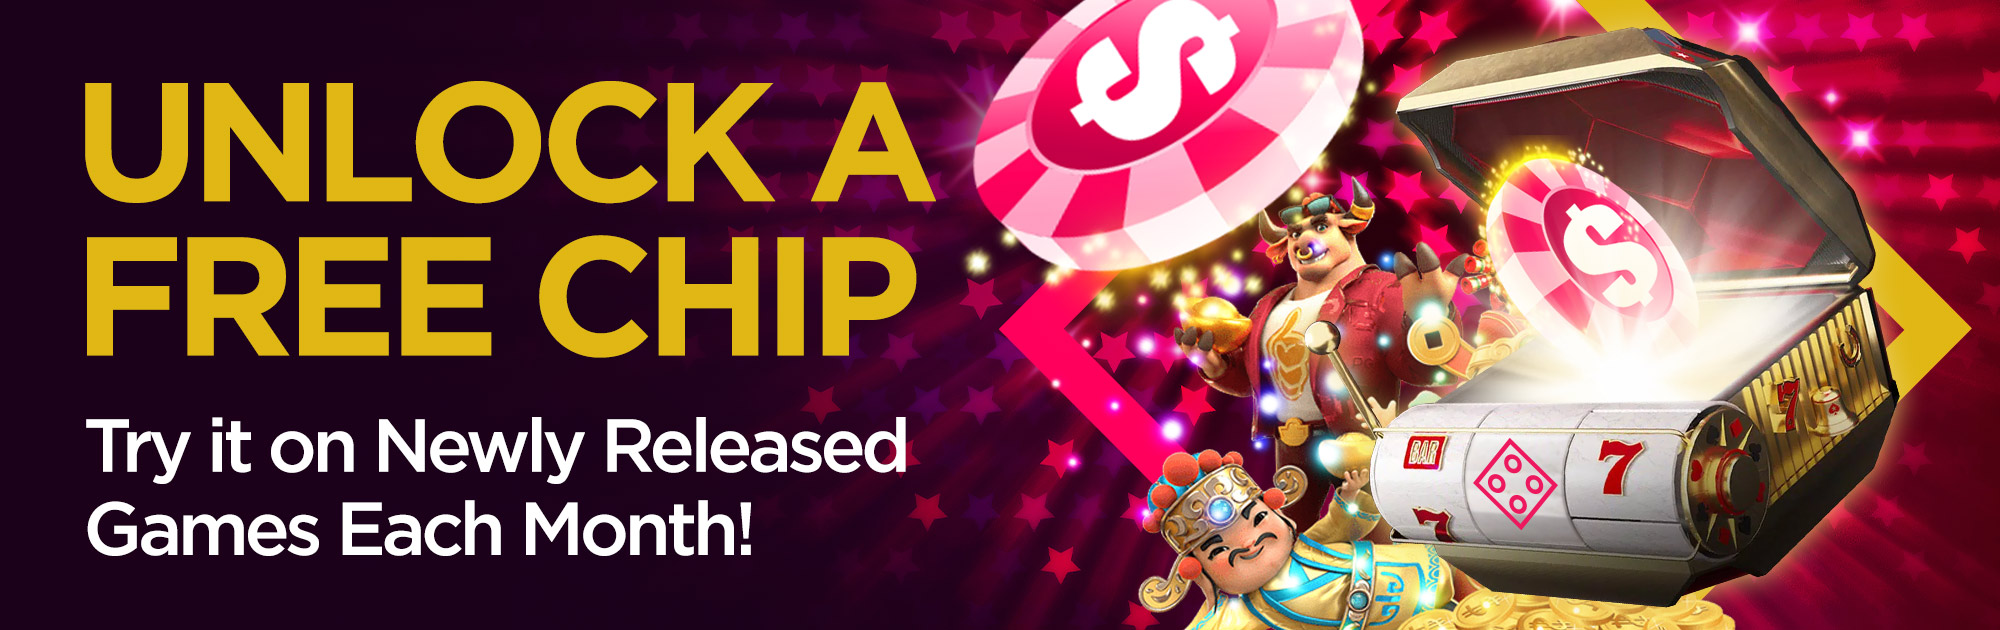 Play Monthly New Games with a Free Chip